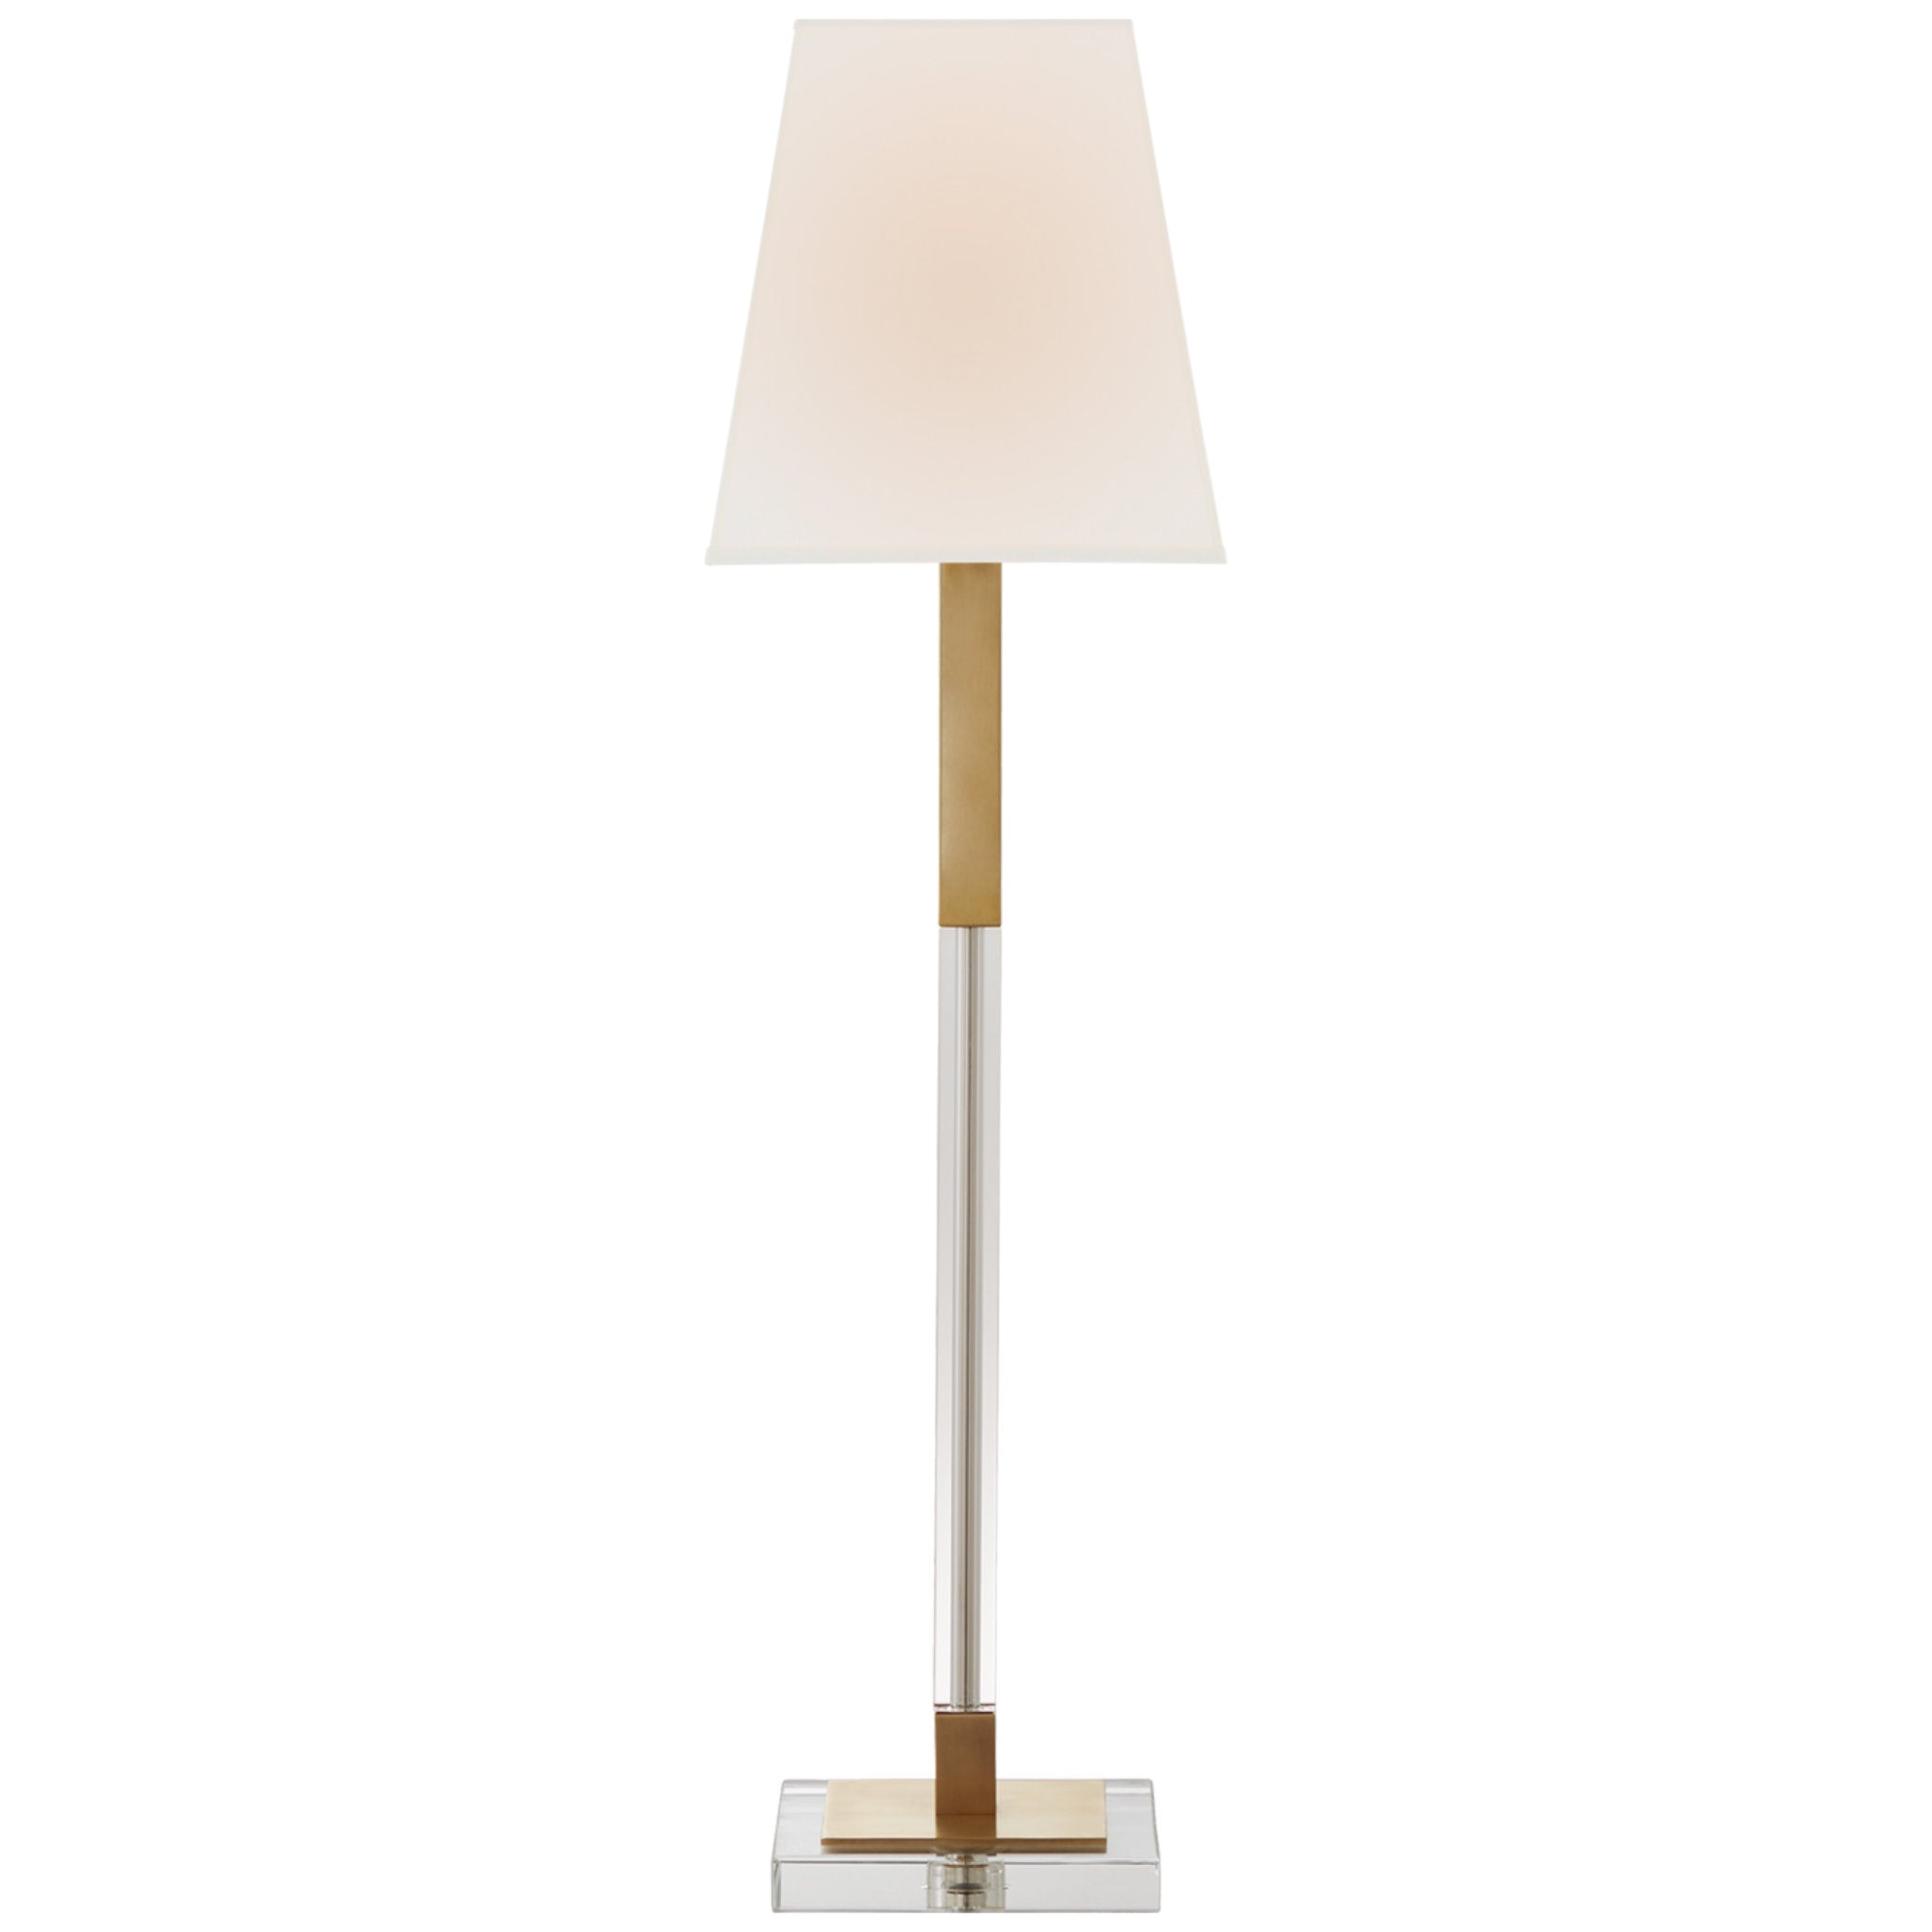 Chapman & Myers Reagan Buffet Lamp in Antique-Burnished Brass and Crystal with Linen Shade